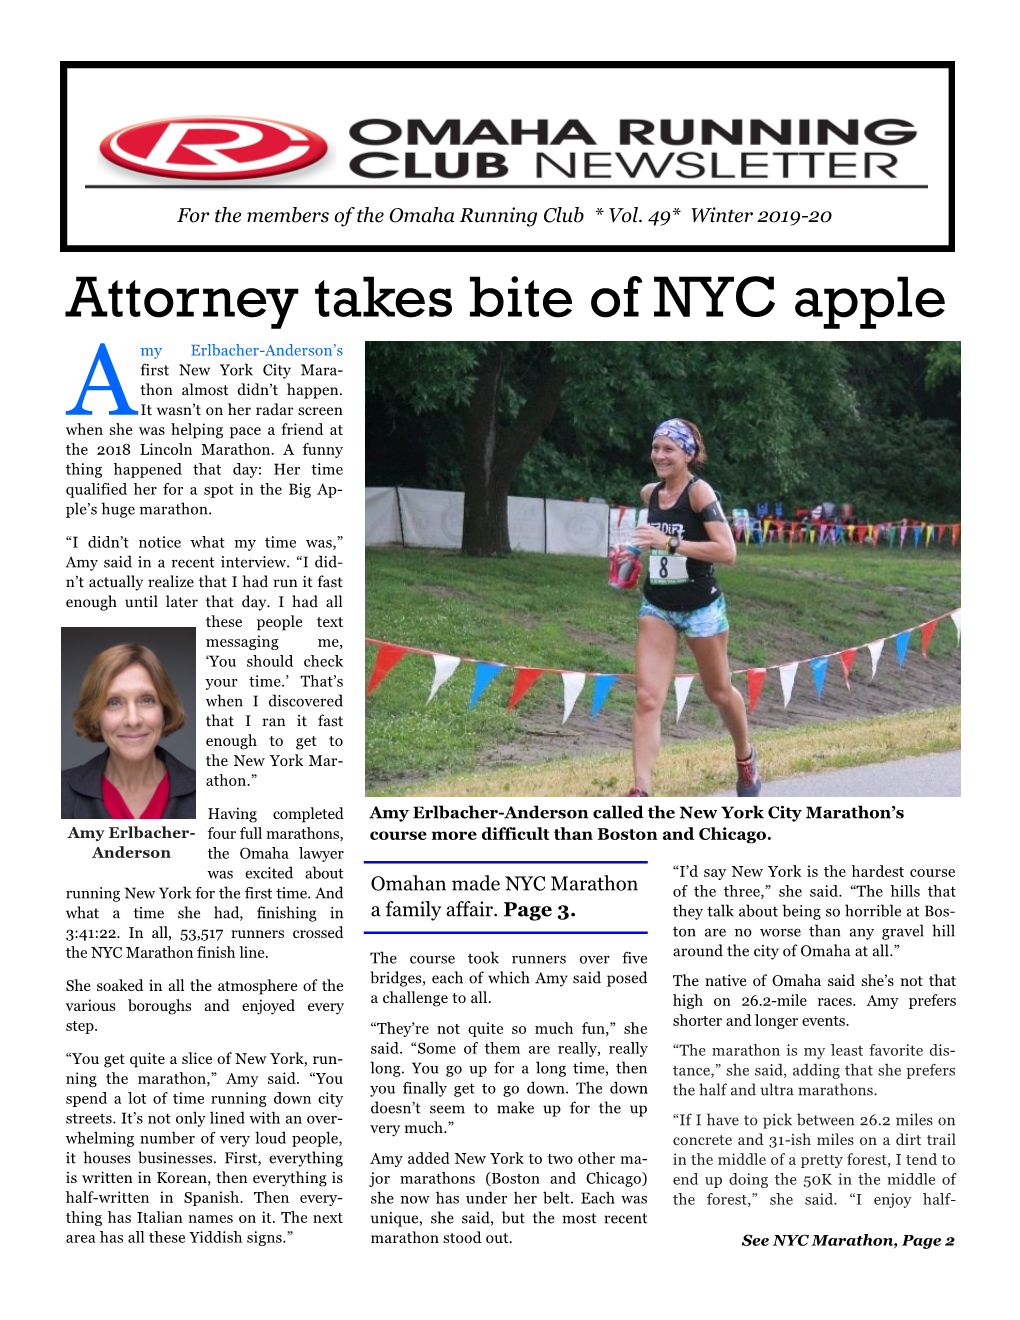 Attorney Takes Bite of NYC Apple My Erlbacher-Anderson’S First New York City Mara- Thon Almost Didn’T Happen